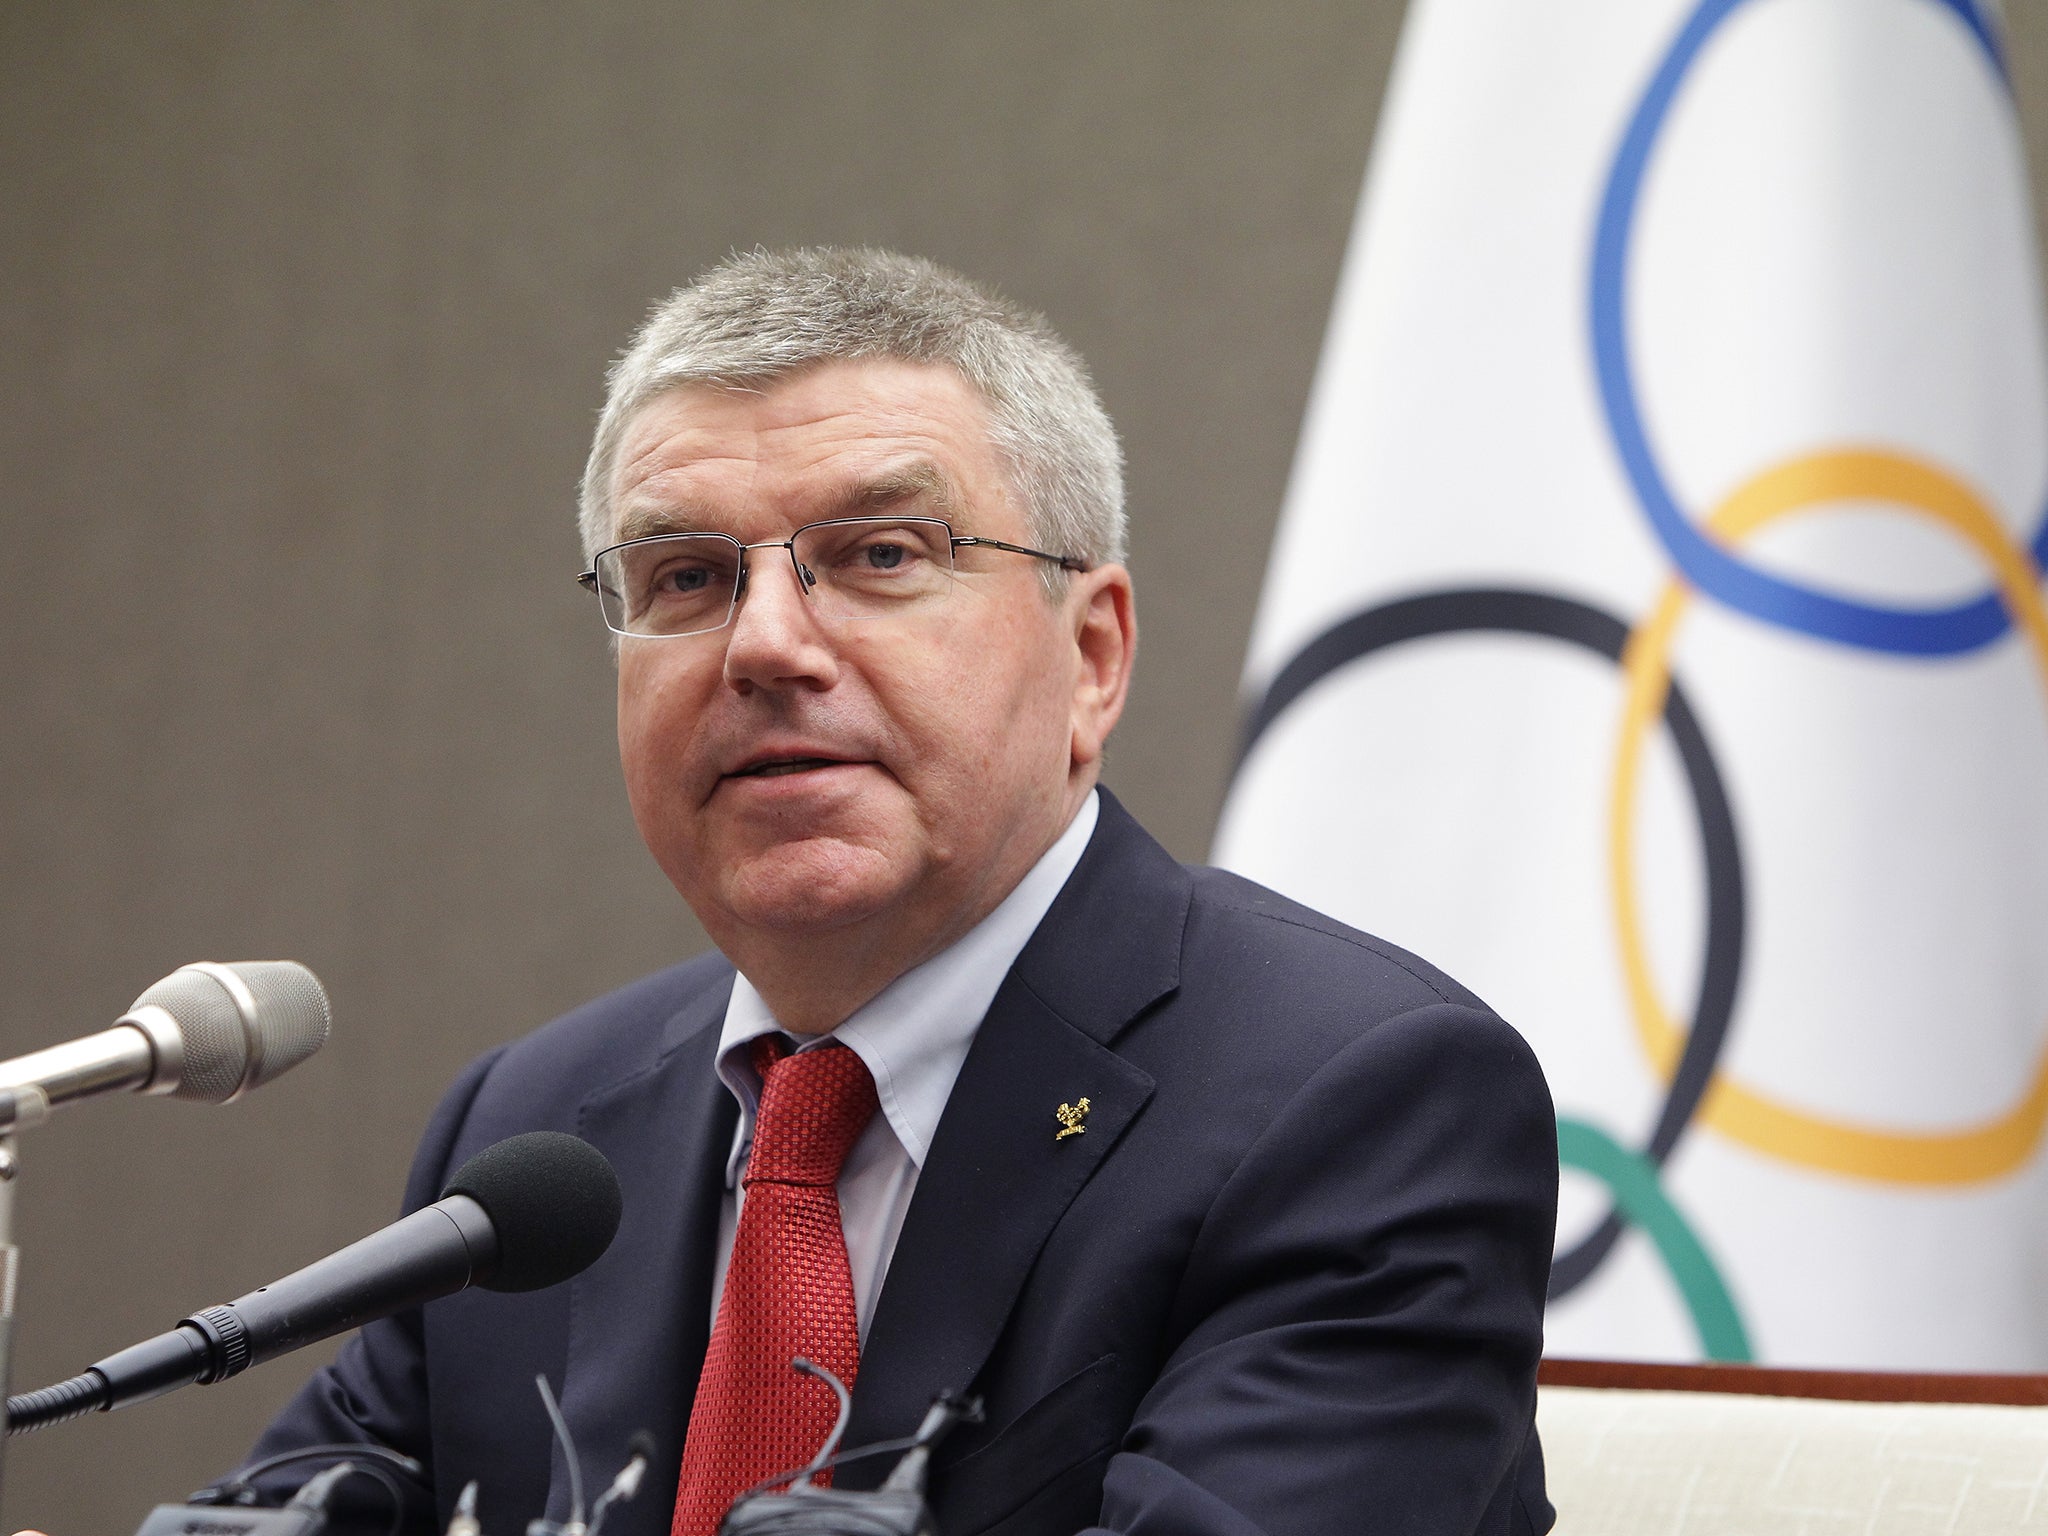 IOC Thomas Bach is expected to announce that Russia will be banned from Pyeongchang 2018